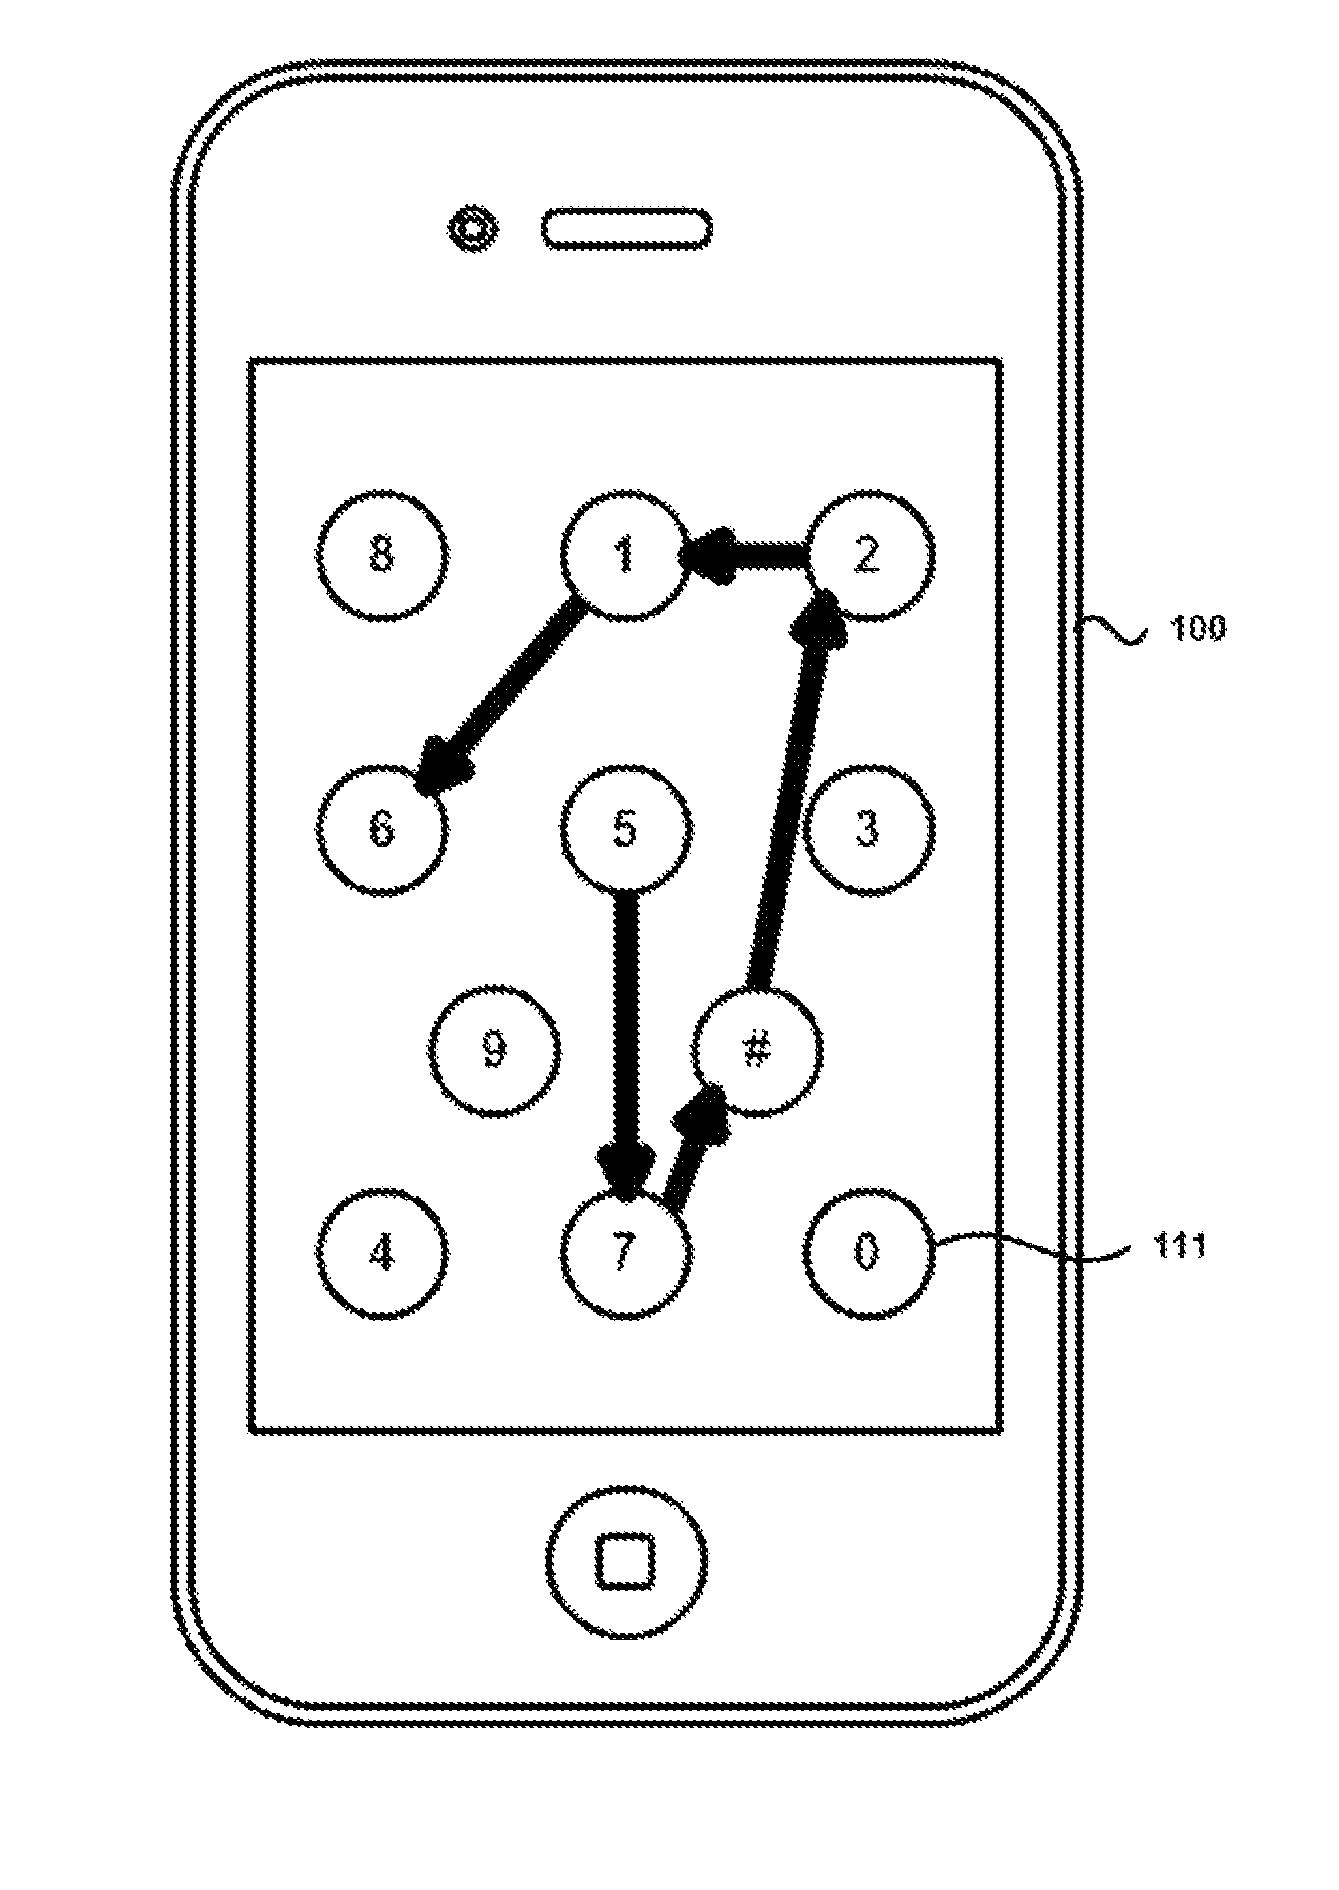 Method for inputting a password into an electronic terminal